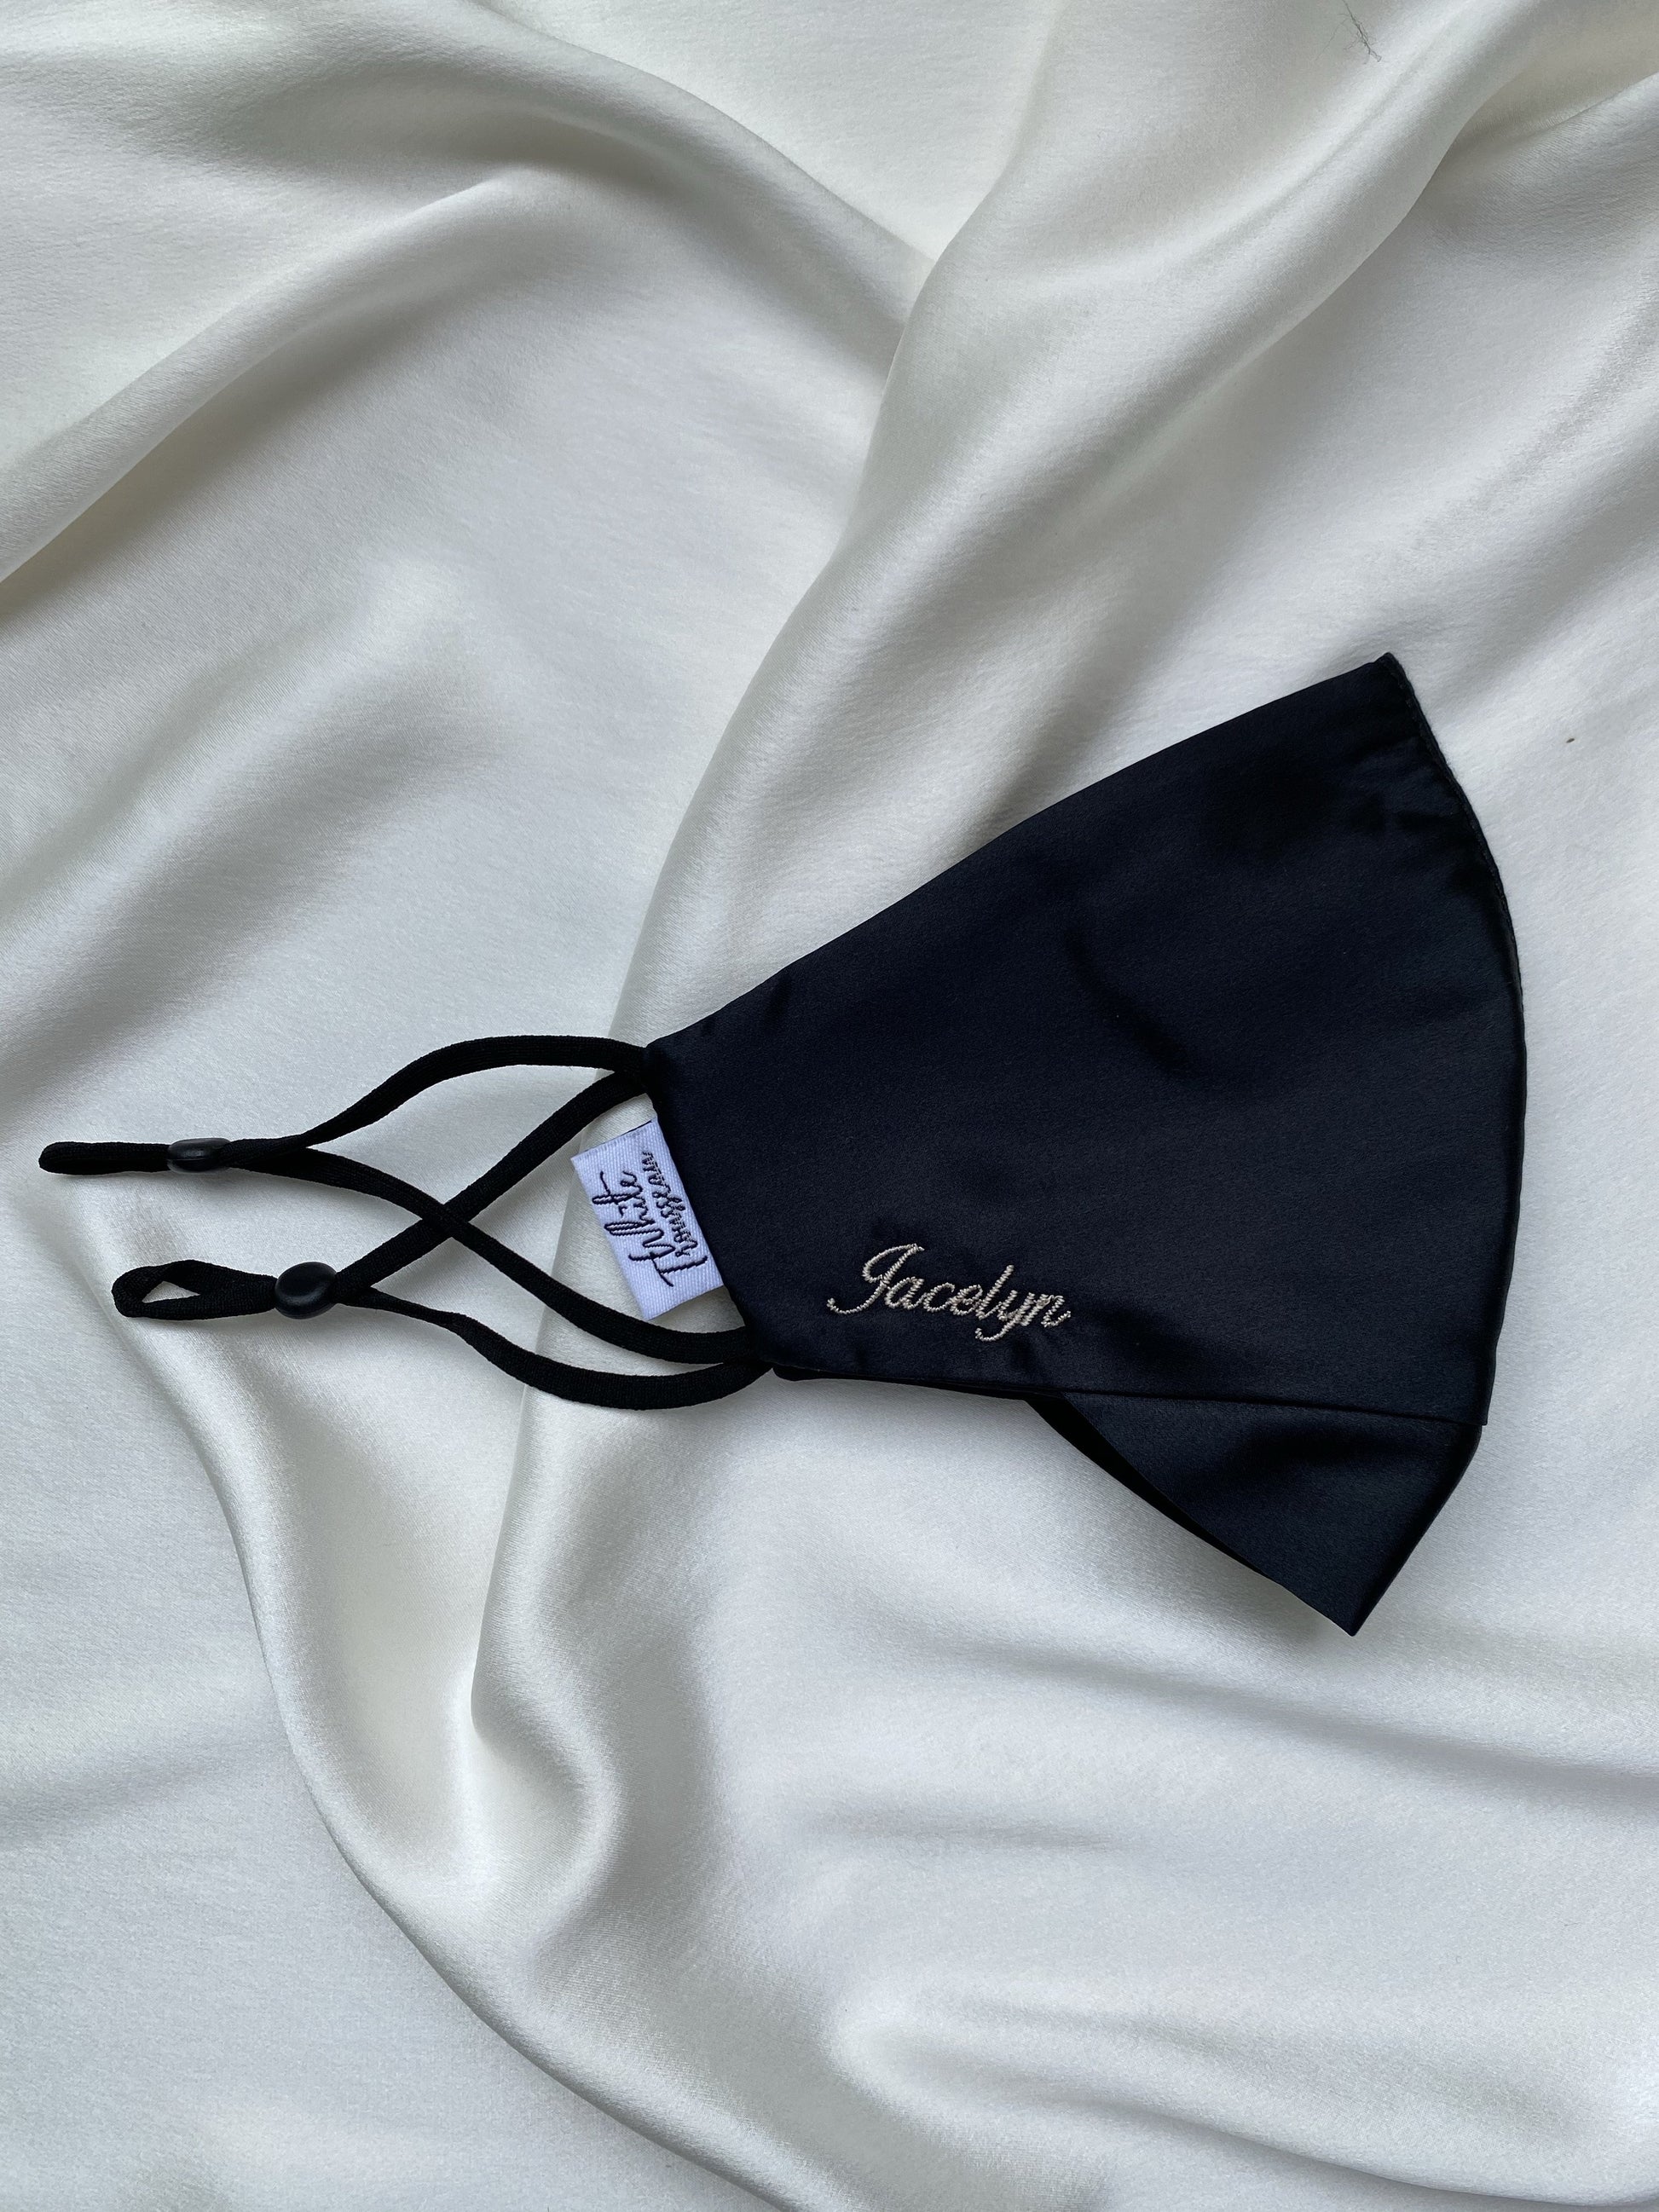 Best custom gifts to buy in 2021? Personalised embroidery of names on your reusuable silk mask.Make a gift extra special by customising your silk face mask with our embroidery services.